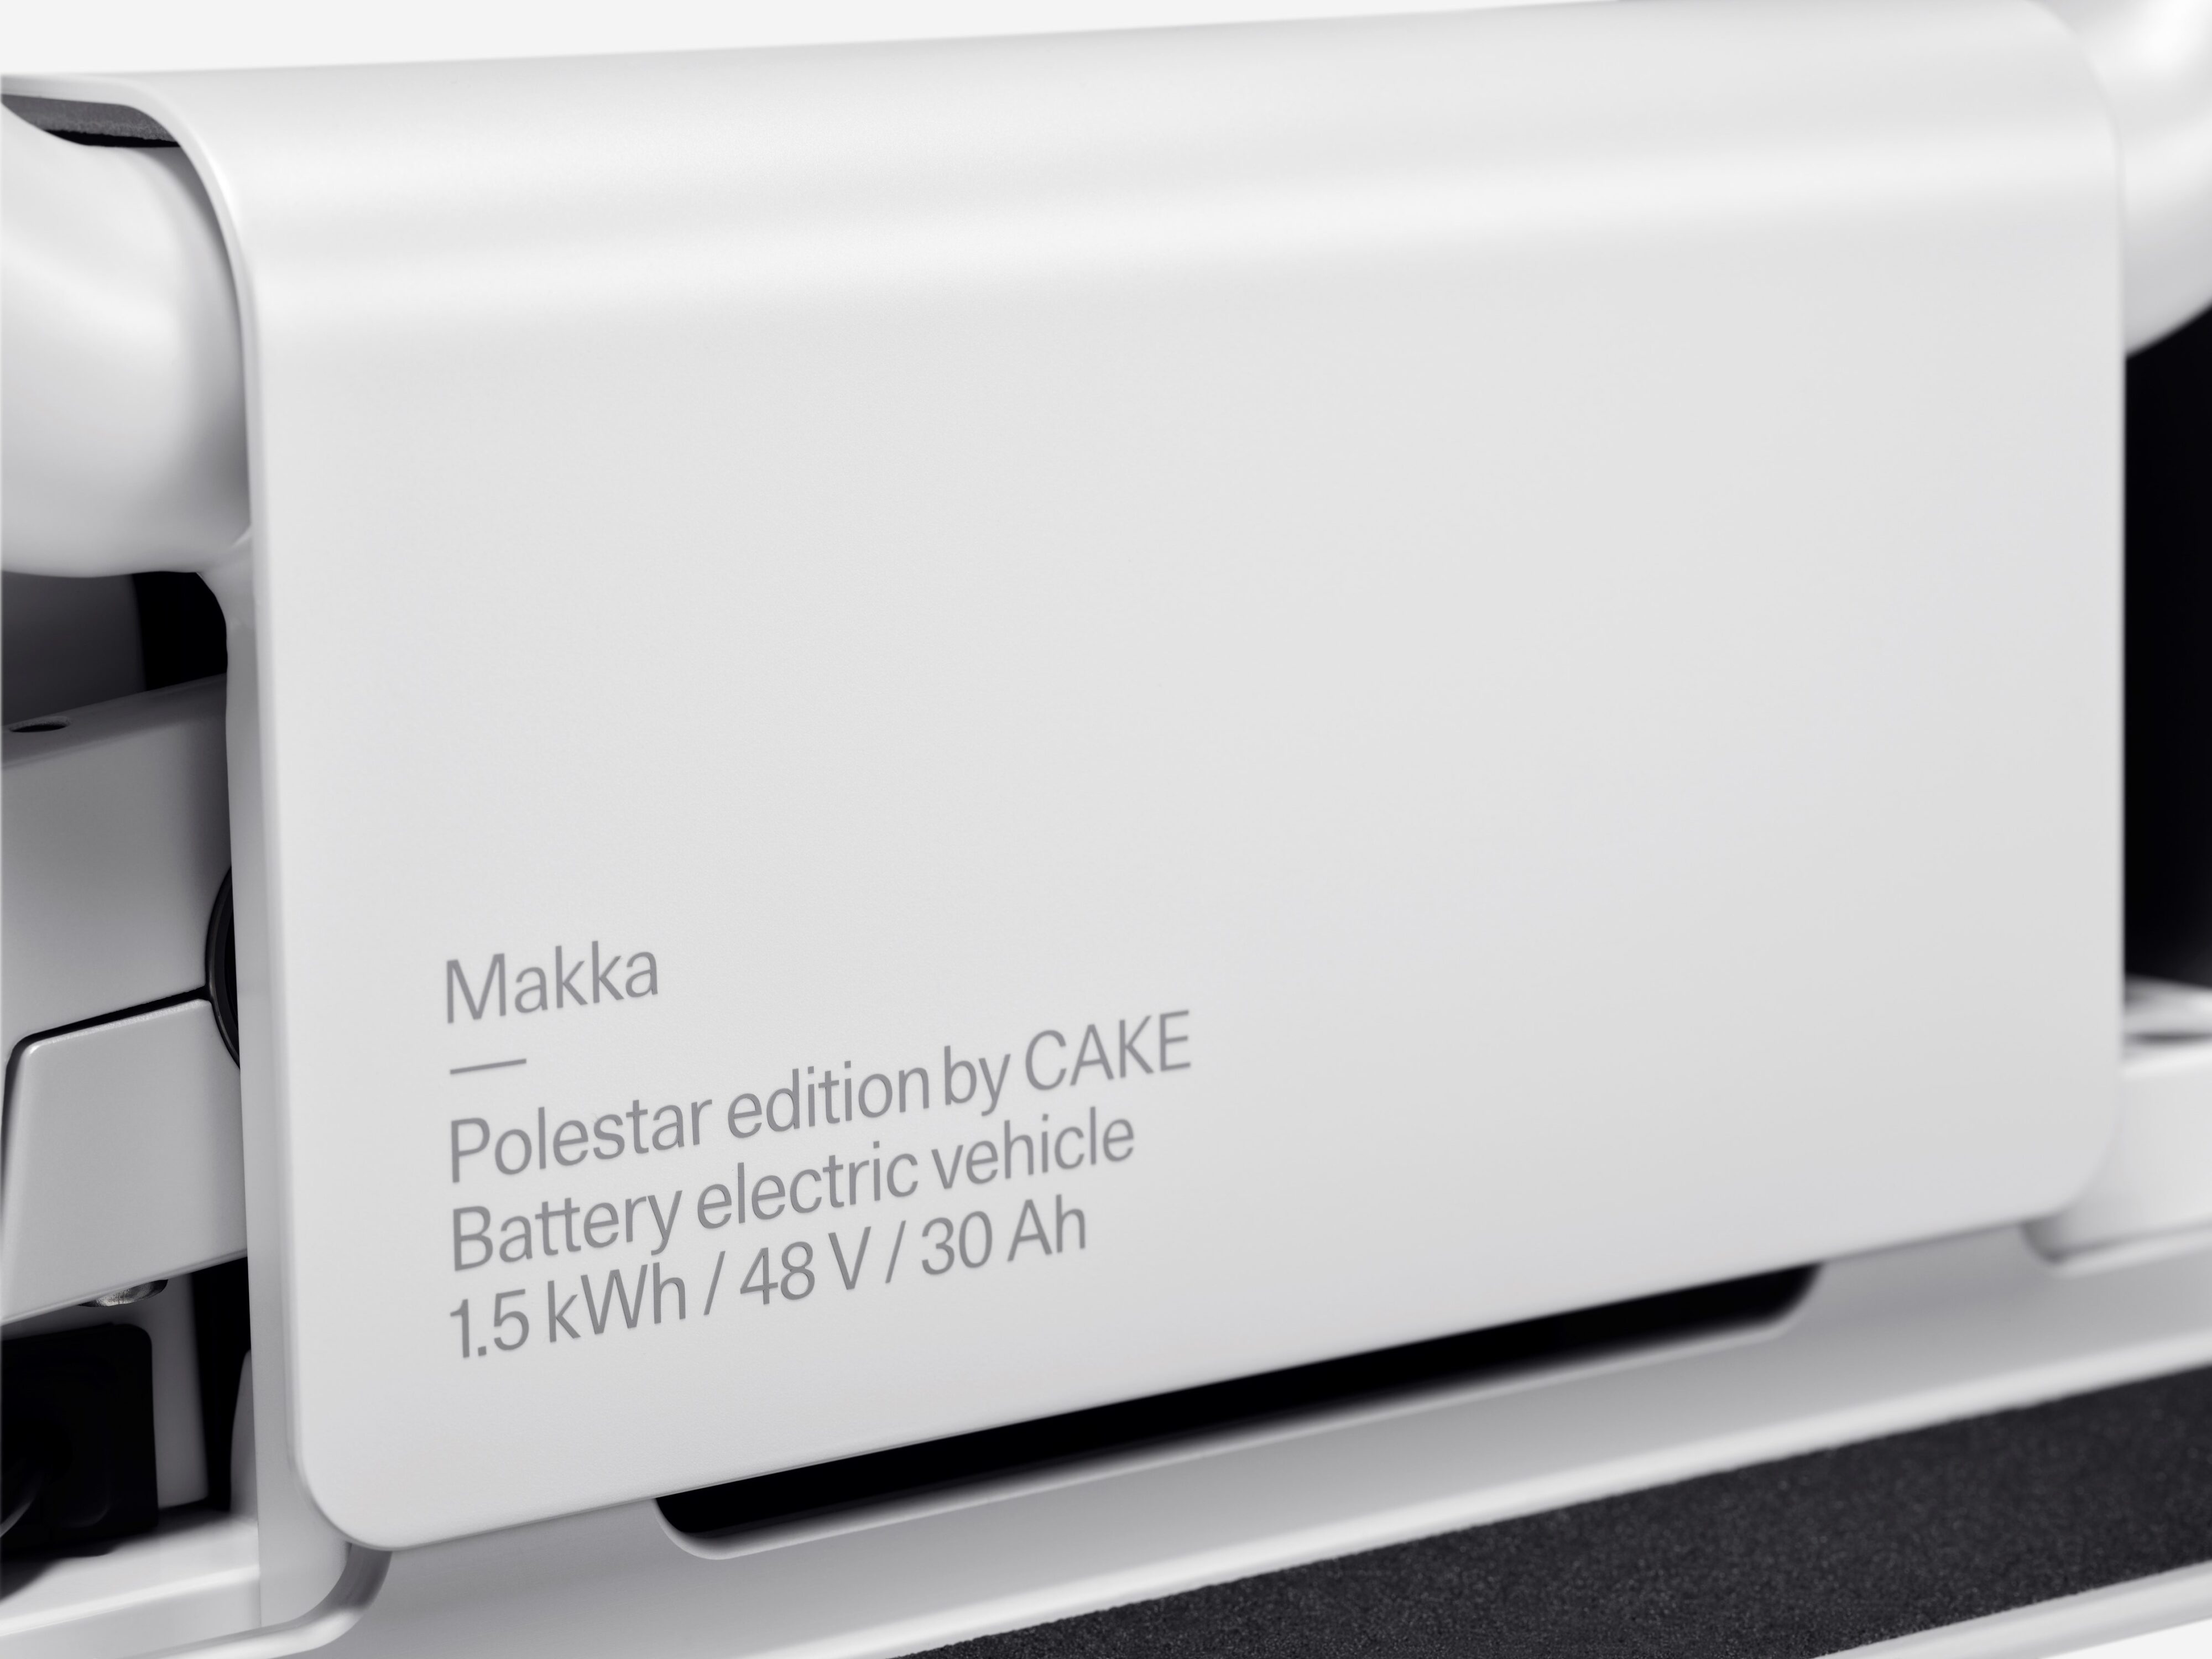 A photo of the battery pack powering the CAKE Makka Polestar edition electric moped